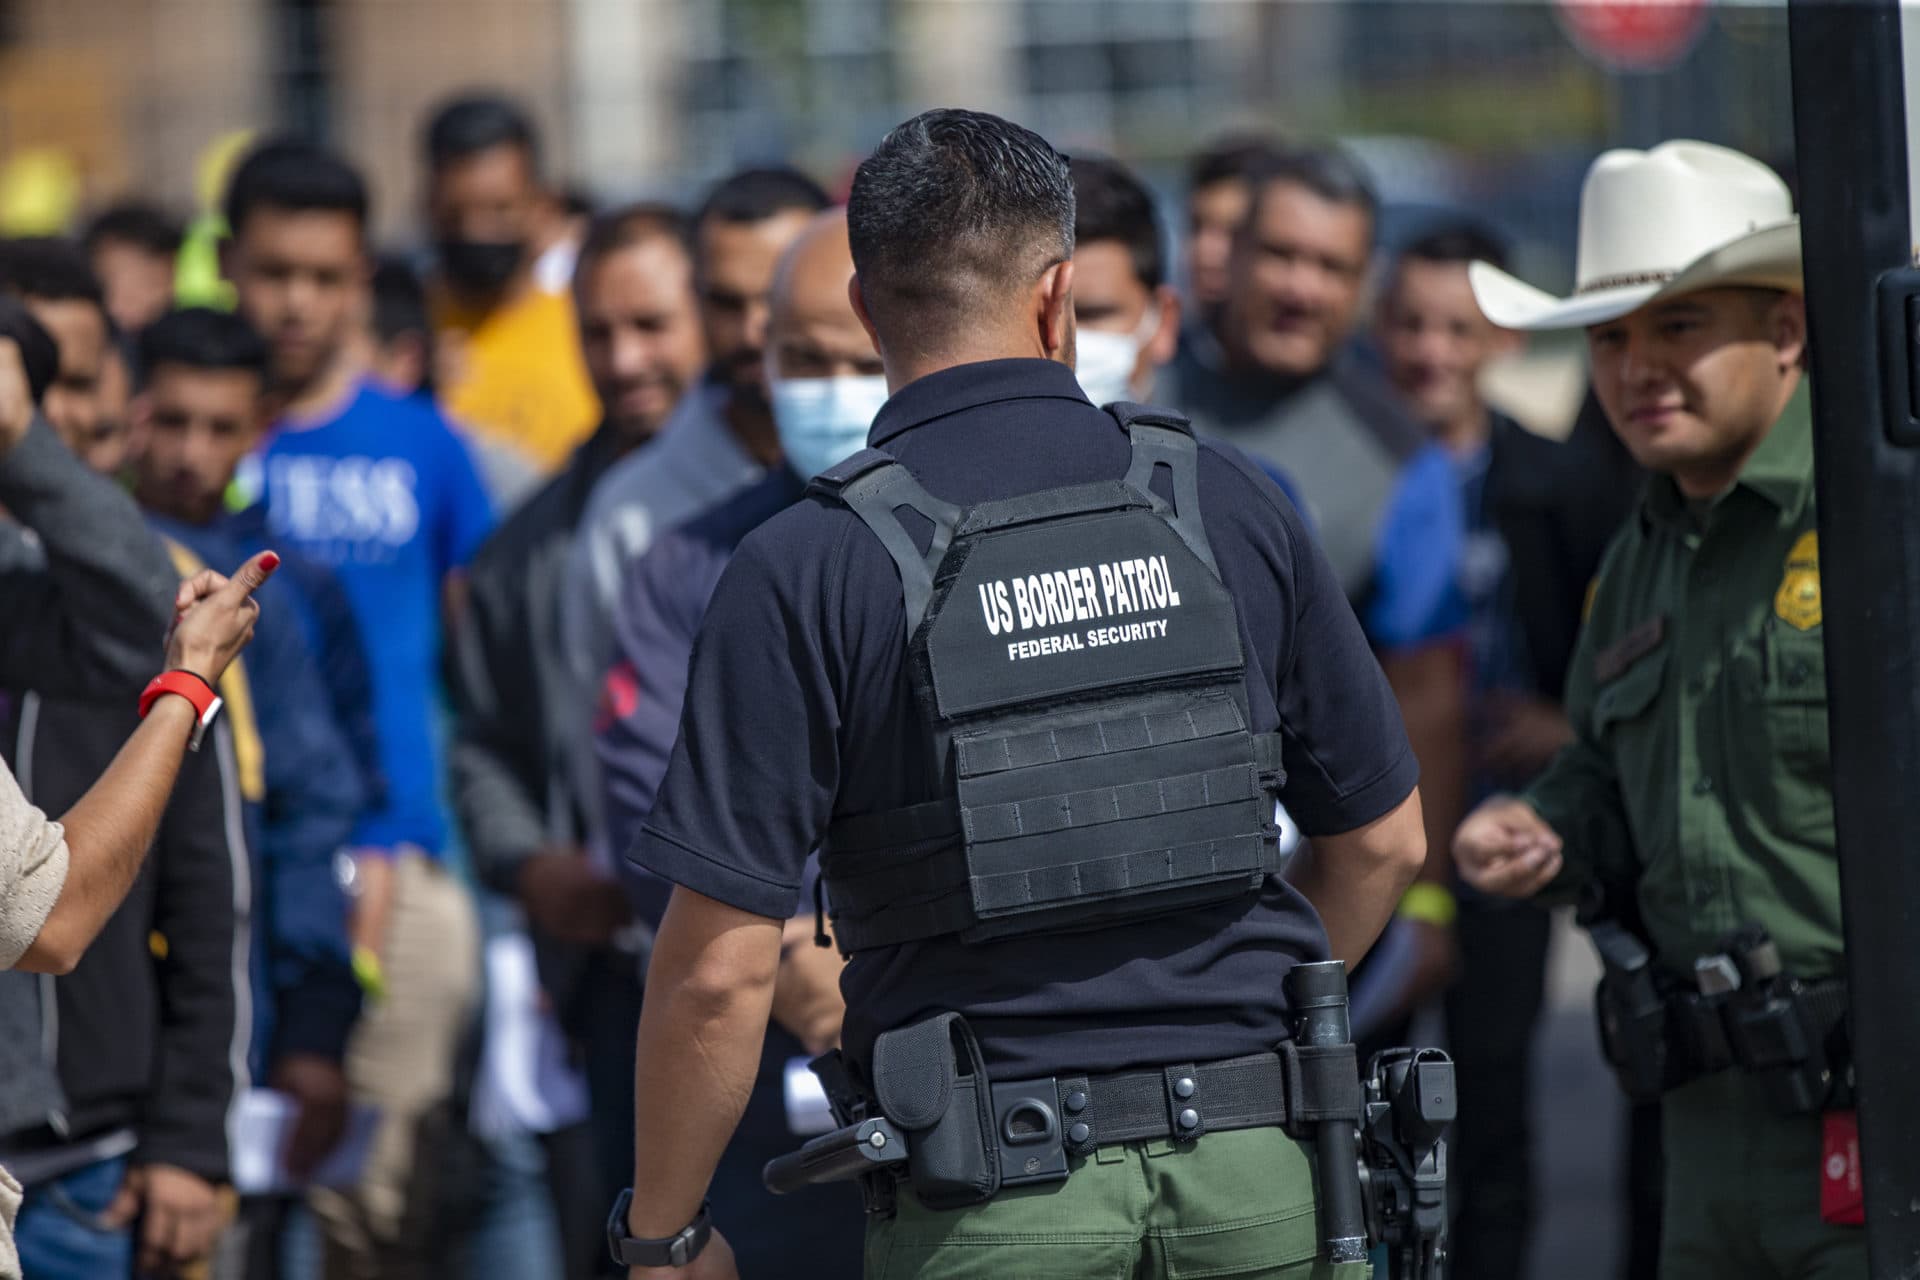 A U.S. Border Patrol agent watches as immigrants line up to be processed after being picked up at the U.S-Mexico border at the Immigration Welcome Center in El Paso. (Jesse Costa/WBUR)